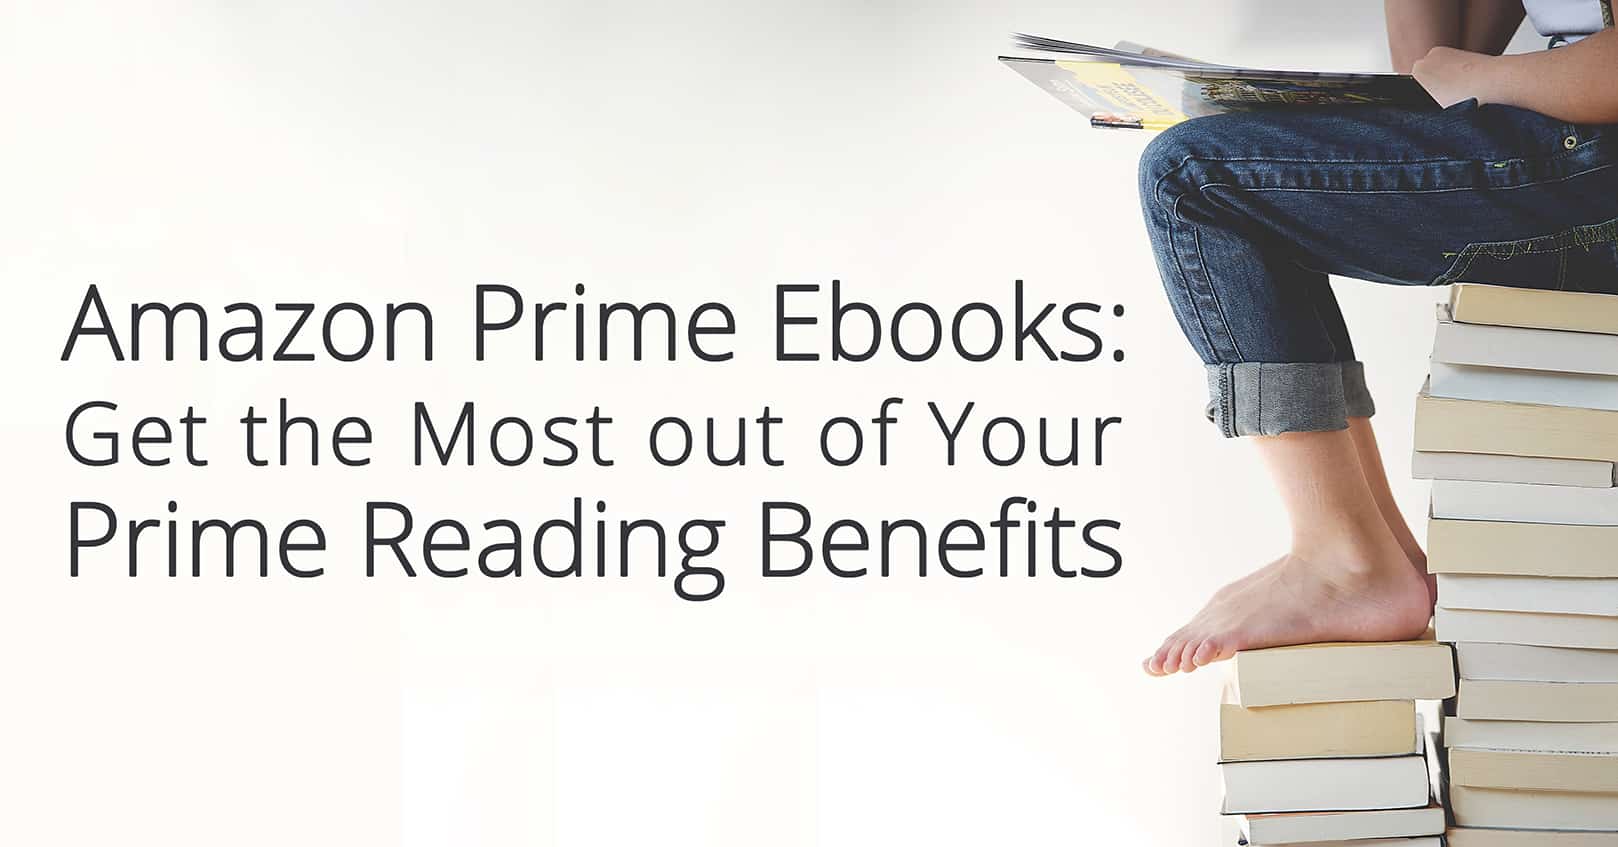 Amazon Prime Ebooks: Get the Most out of Your Prime Reading Benefits